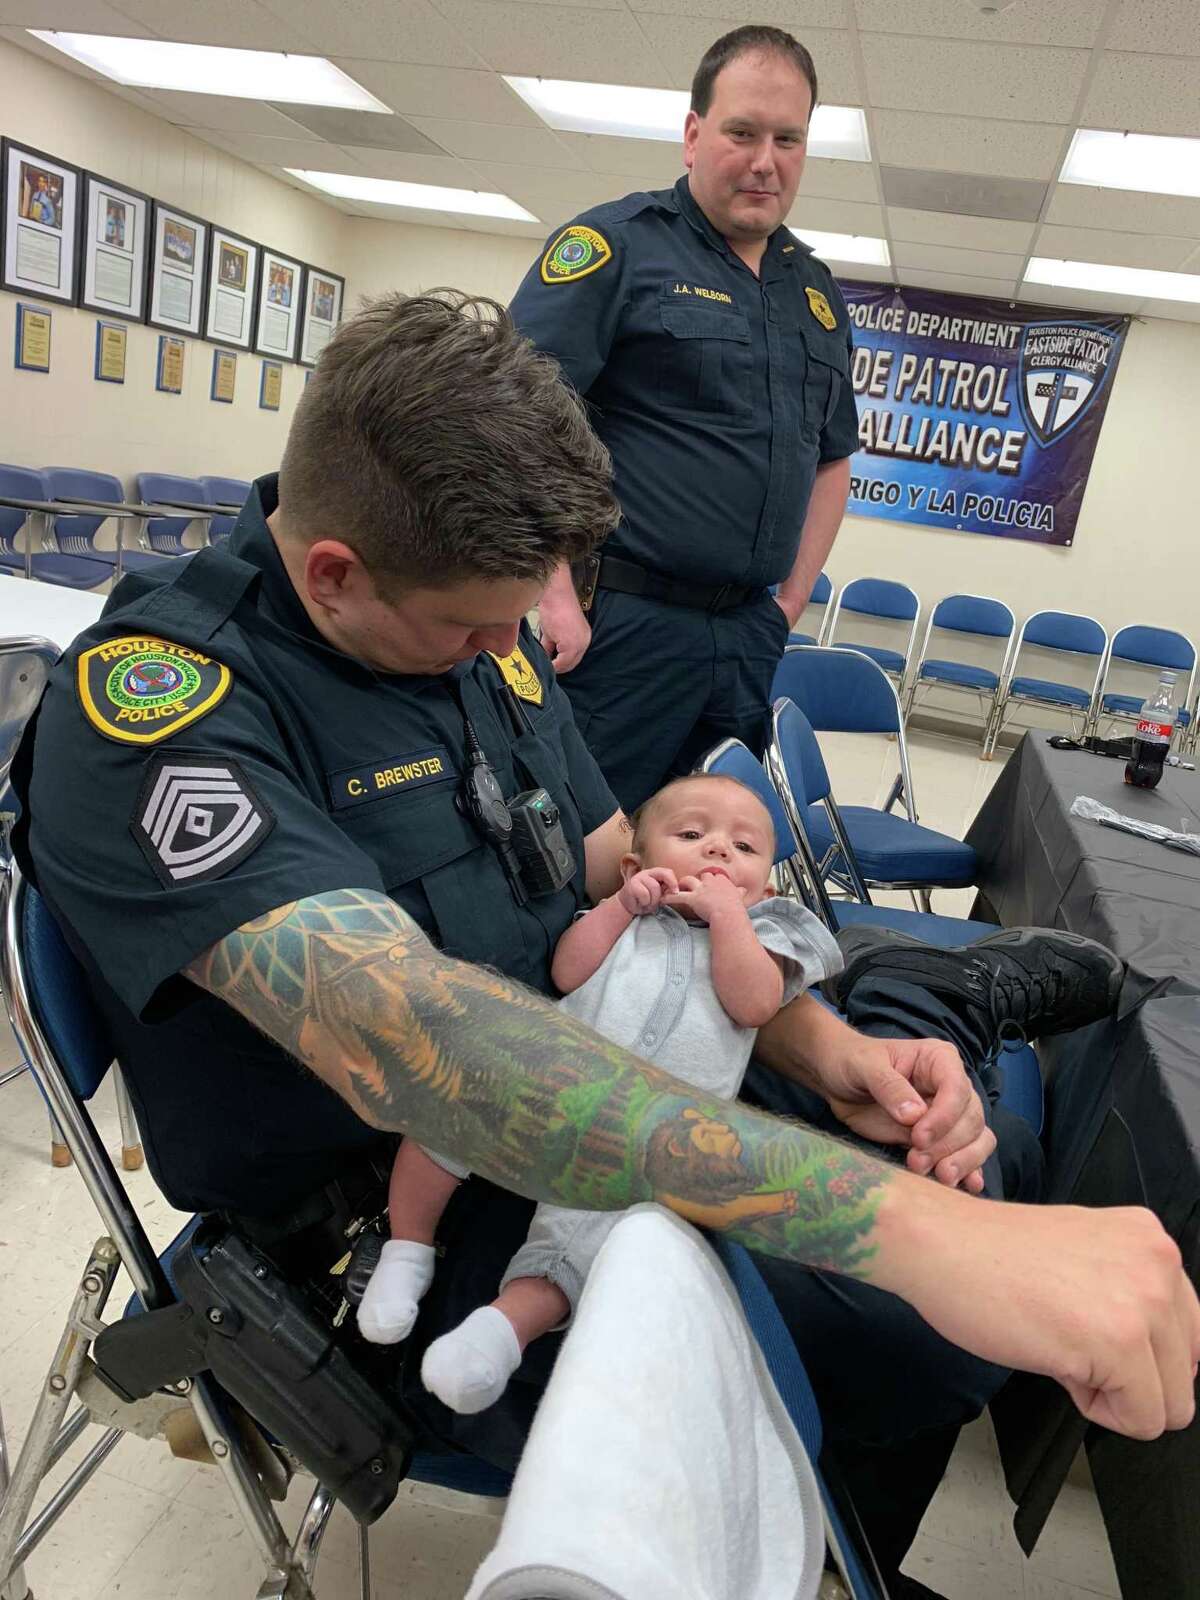 A Houston police officer brought her child to the station and these photos are of Sgt. Christopher Brewster holding the baby. Brewster was gunned down Saturday responding to a domestic violence call in east Houston. Photo courtesy Houston police officer Brooke Chavez.